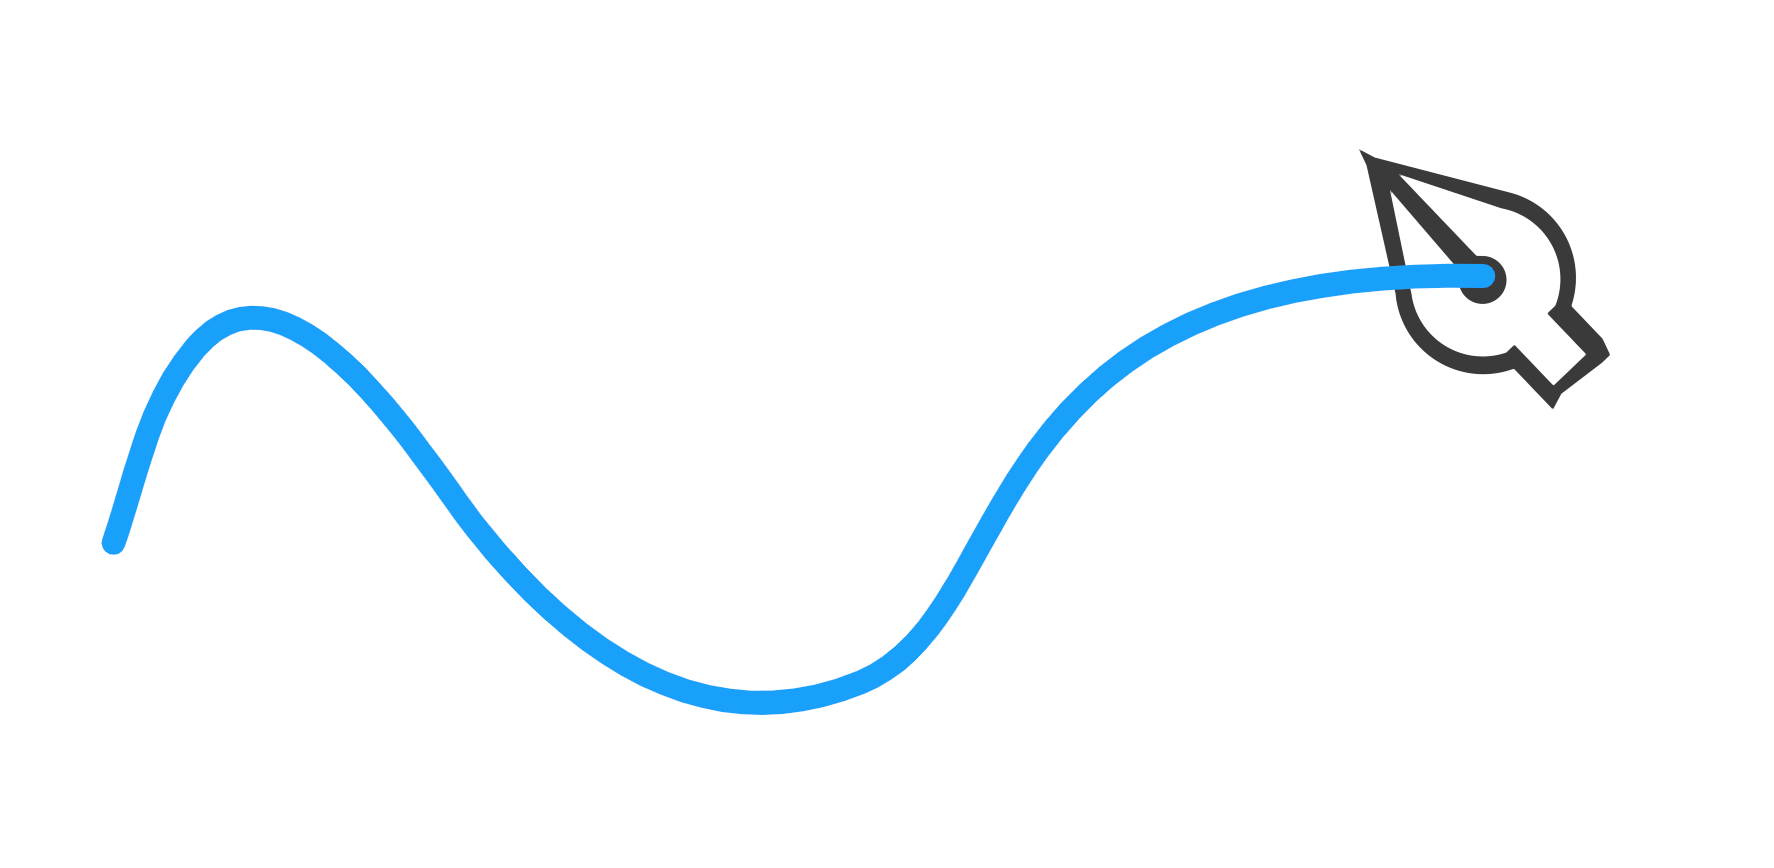 An SVG icon of a pen with its center point positioned on a path